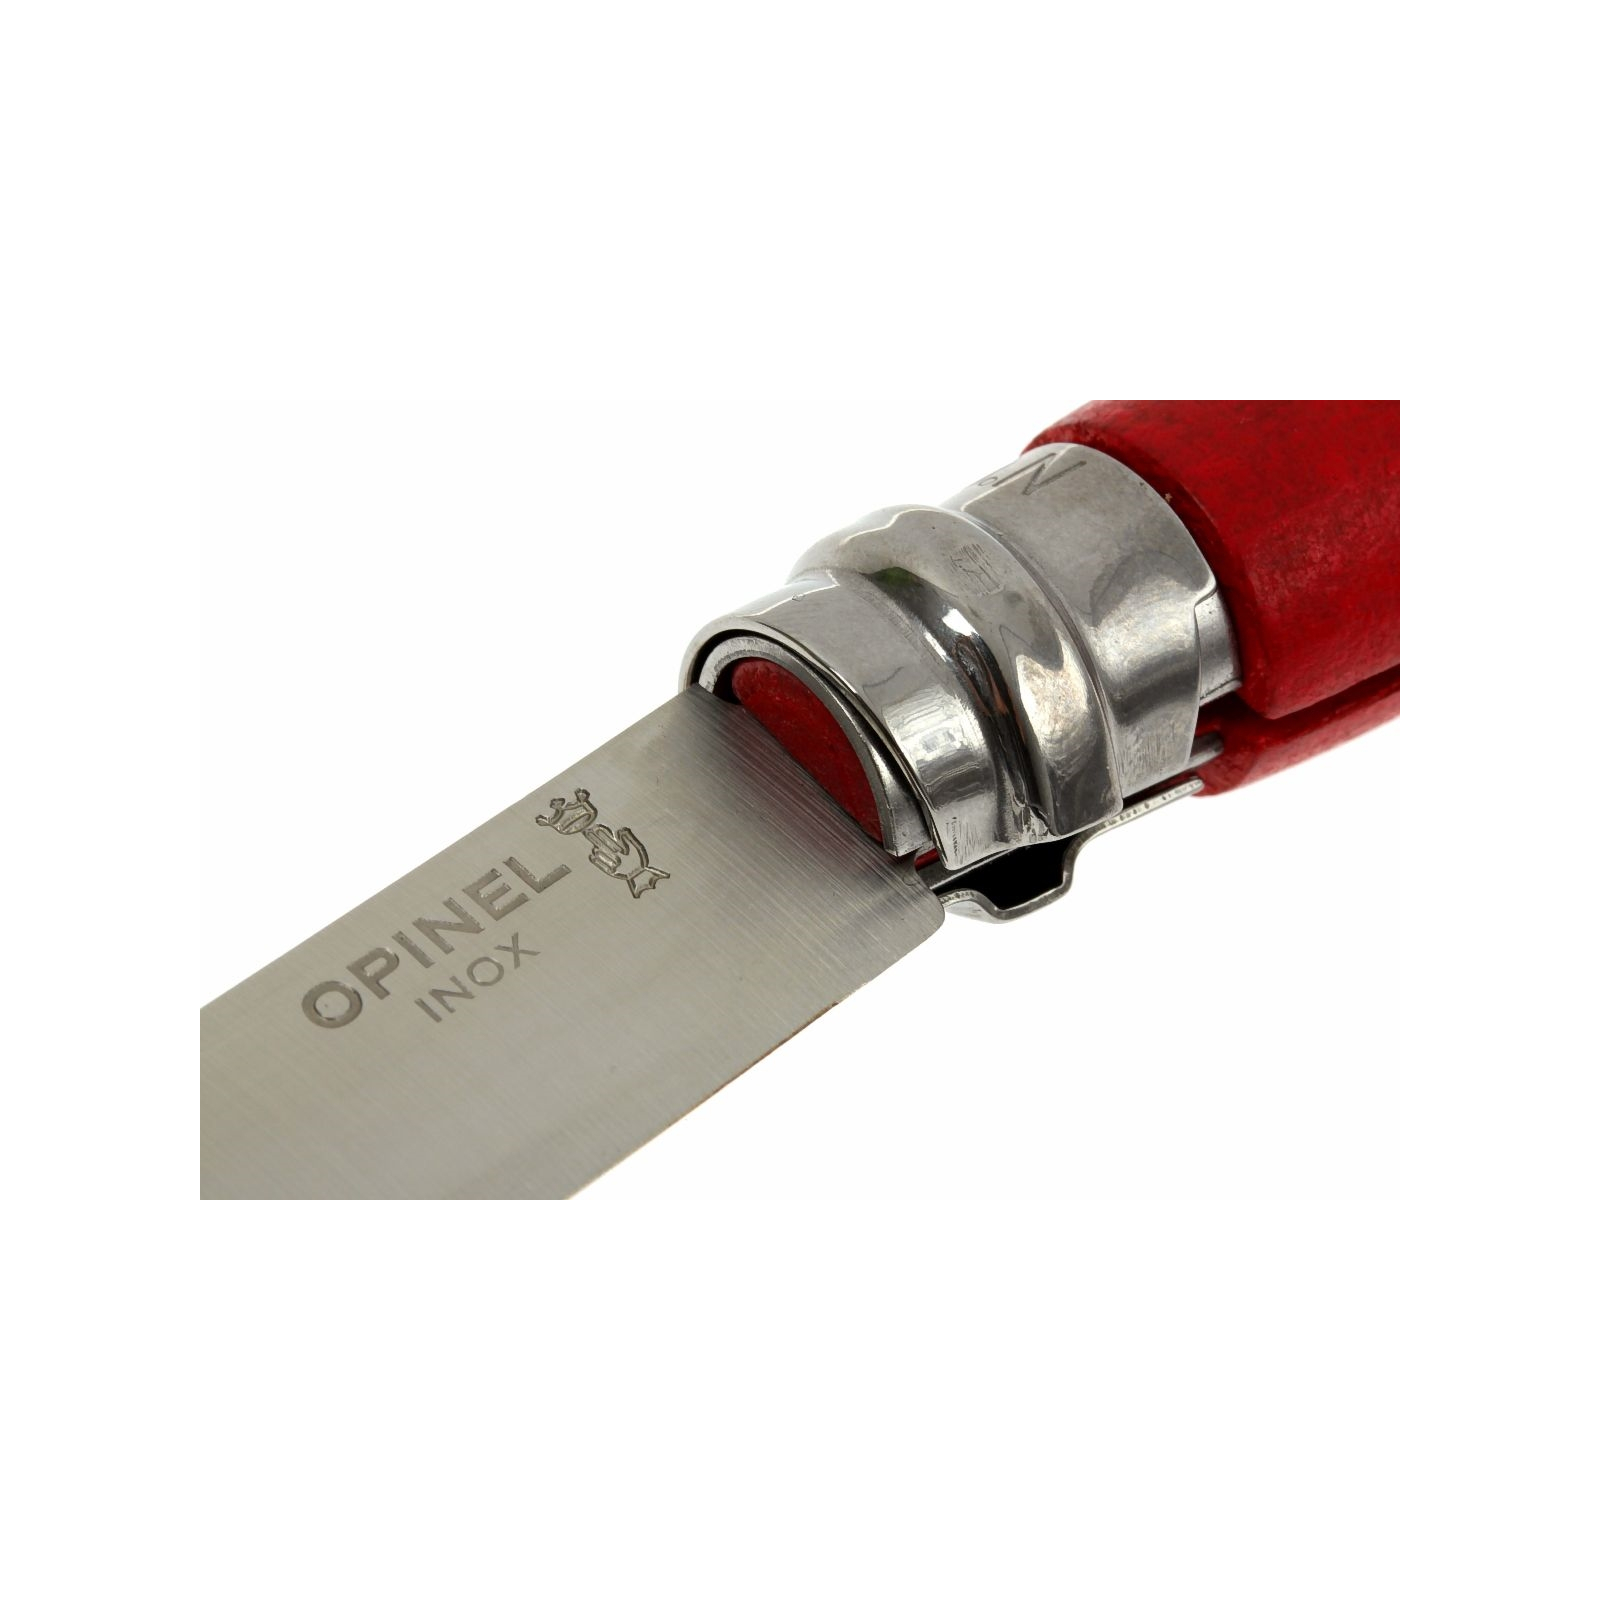 Нож Opinel №7 "My First Opinel" red (001698) изображение 3